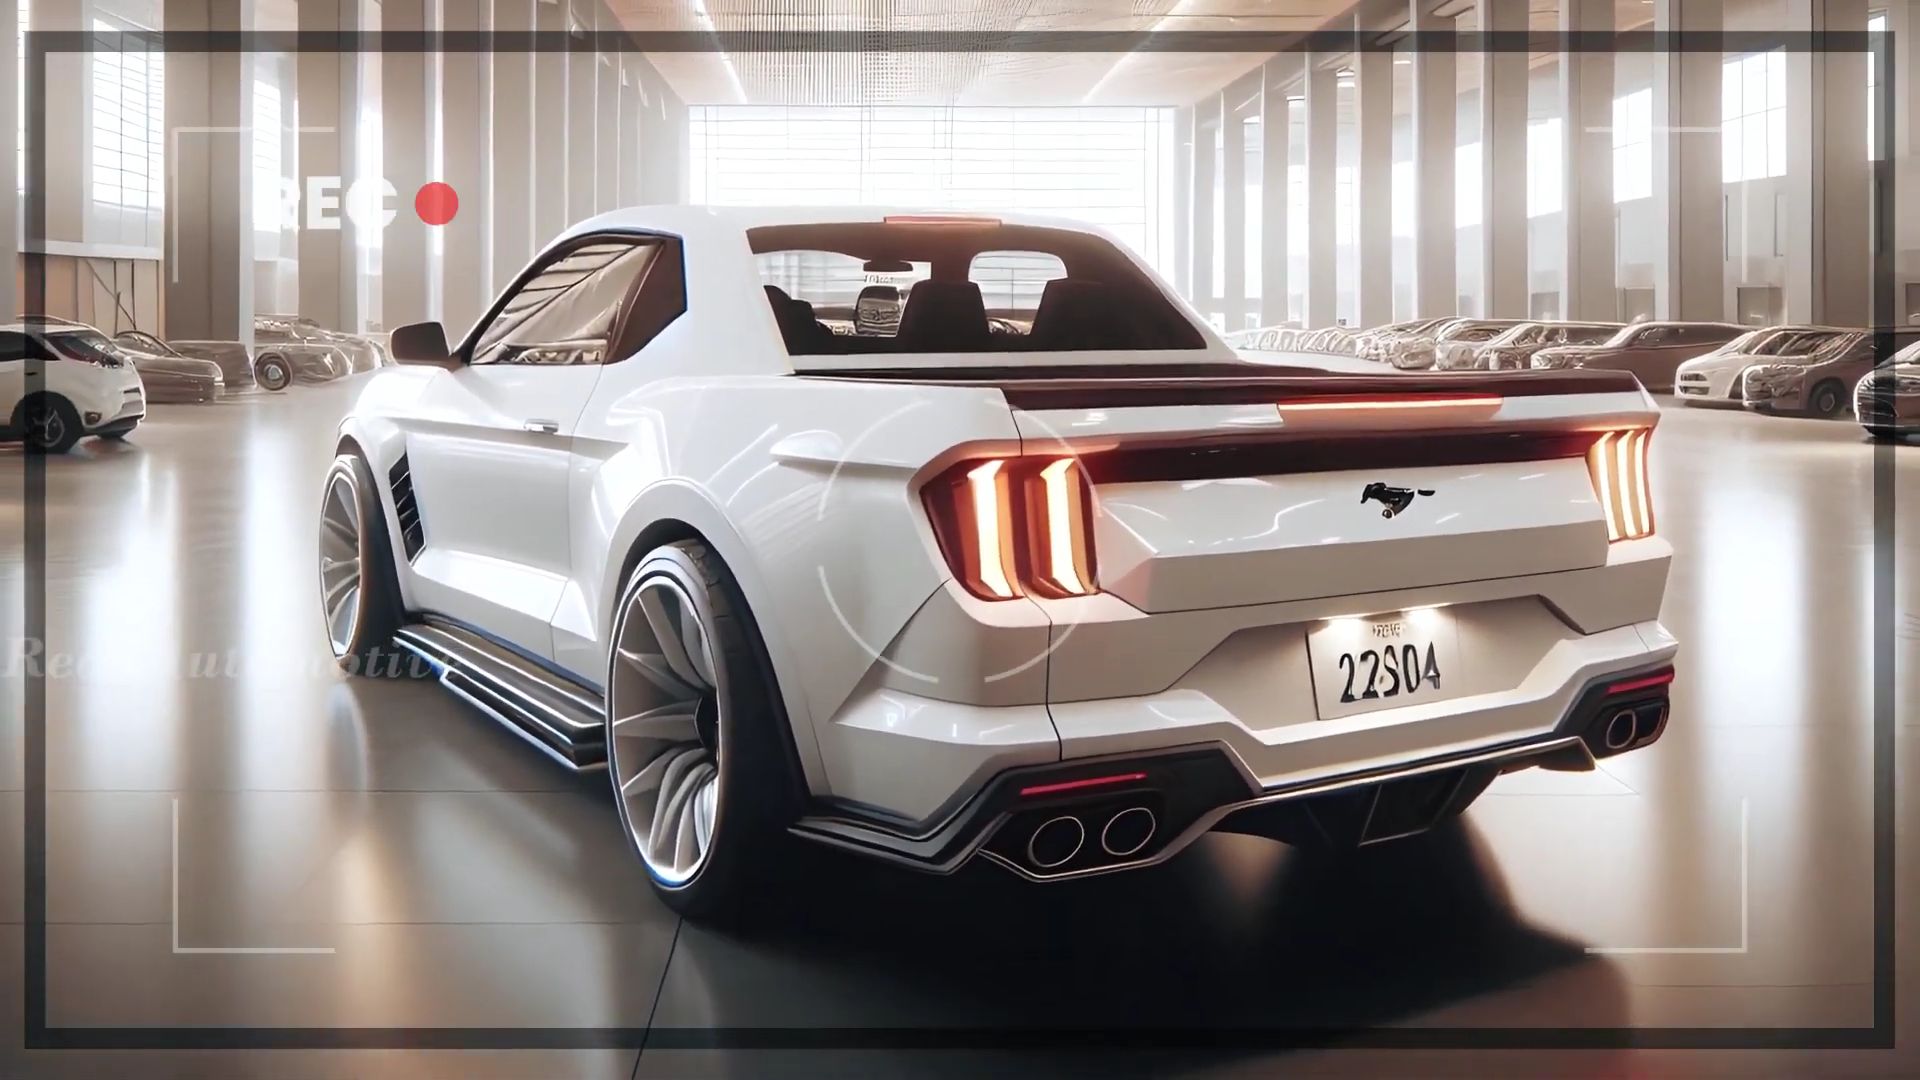 Ford's Mustang Ute Concept